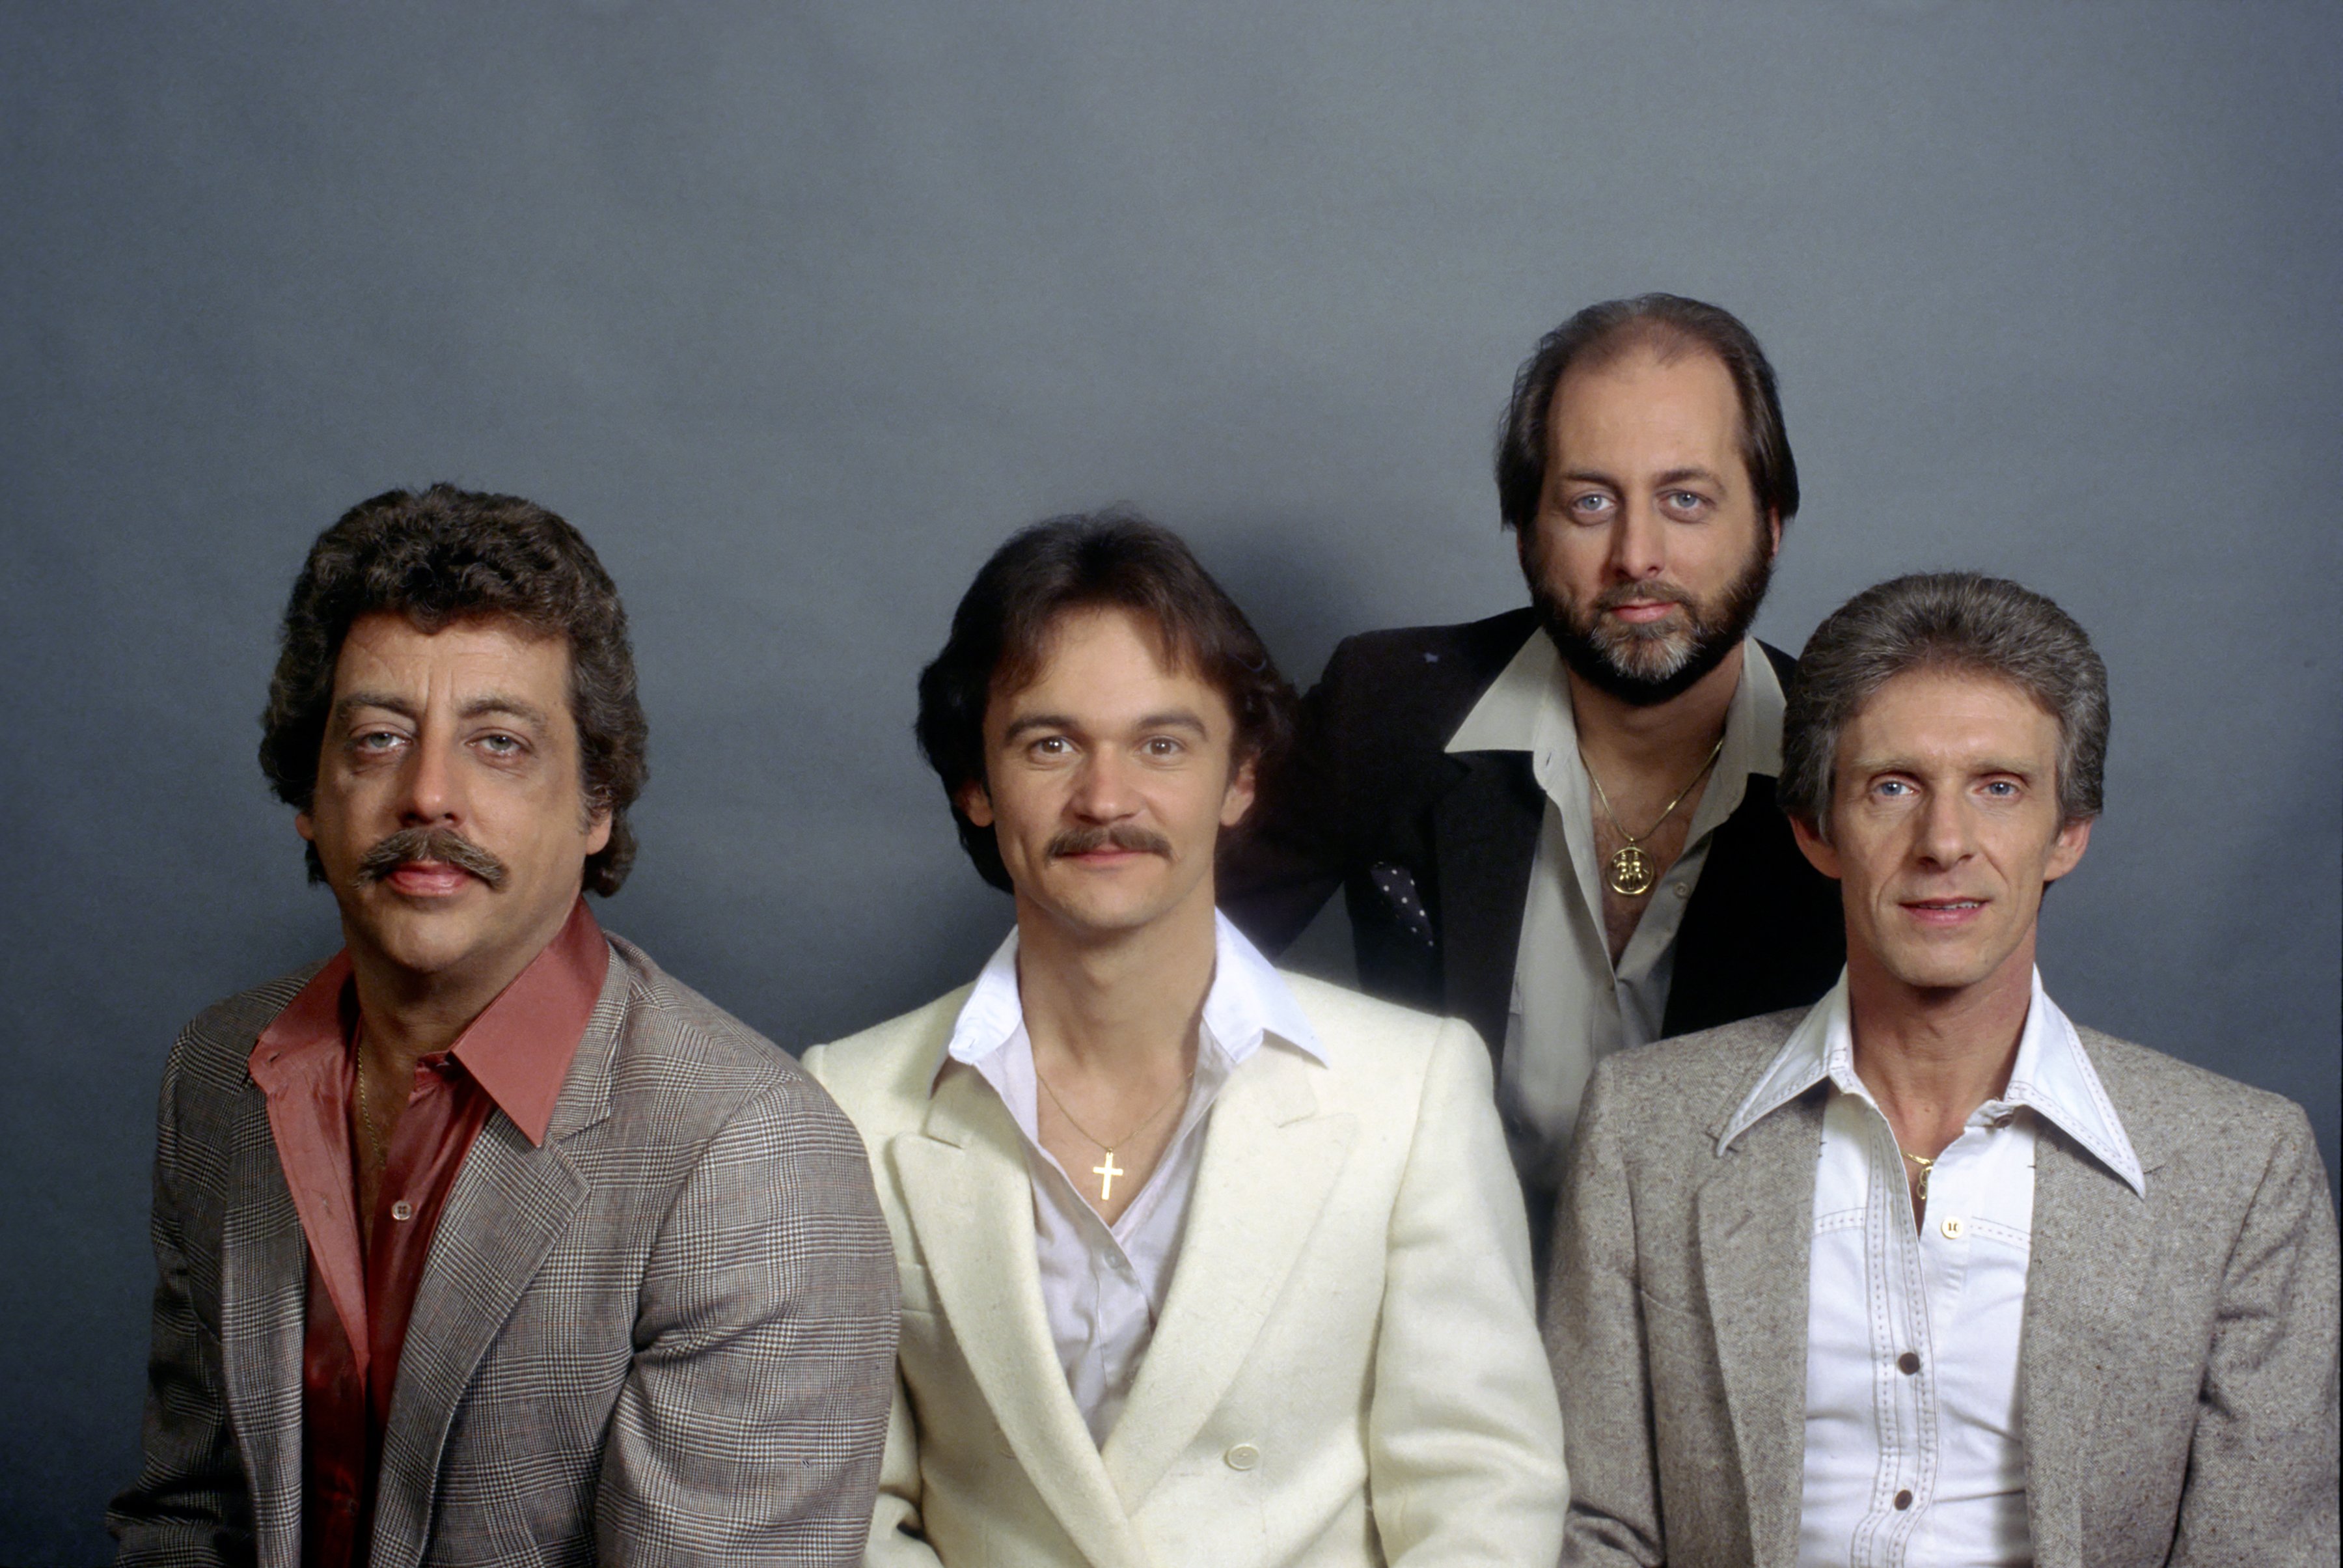 The Statler Brothers members from left to right: Harold Reid, Jimmy Fortune, Don Reid and Phil Balsley posing for a photo in 1970 | Photo: Michael Ochs Archives/Getty Images